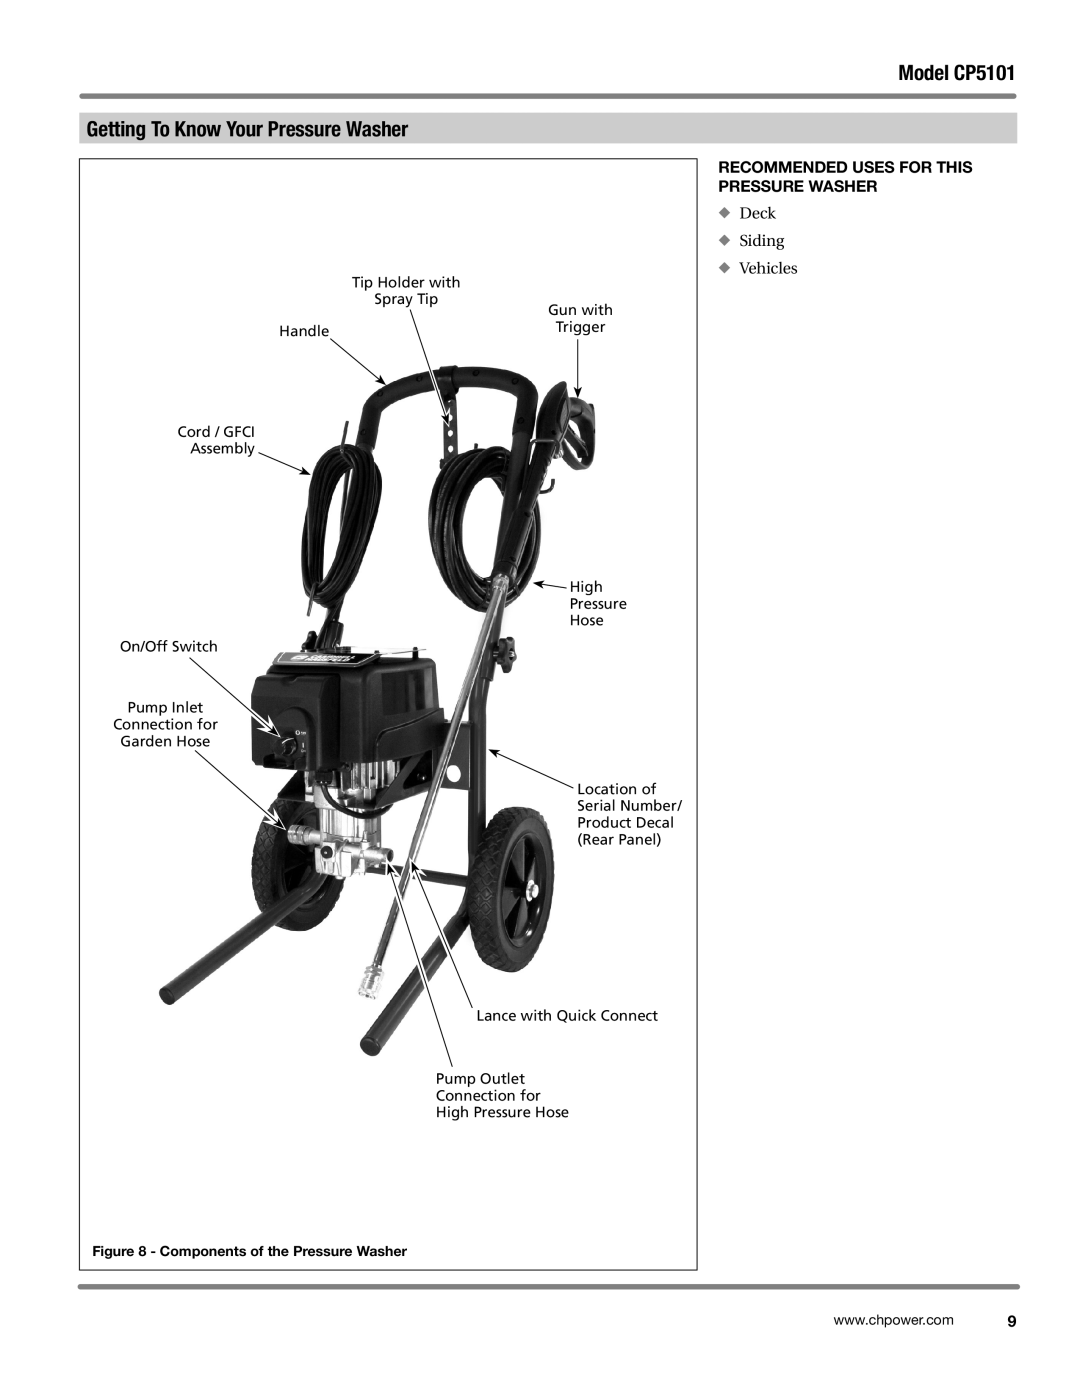 Campbell Hausfeld CP5101 manual GettingUnpackingTo Know Your Pressure Washer, Recommended Uses for this Pressure Washer 